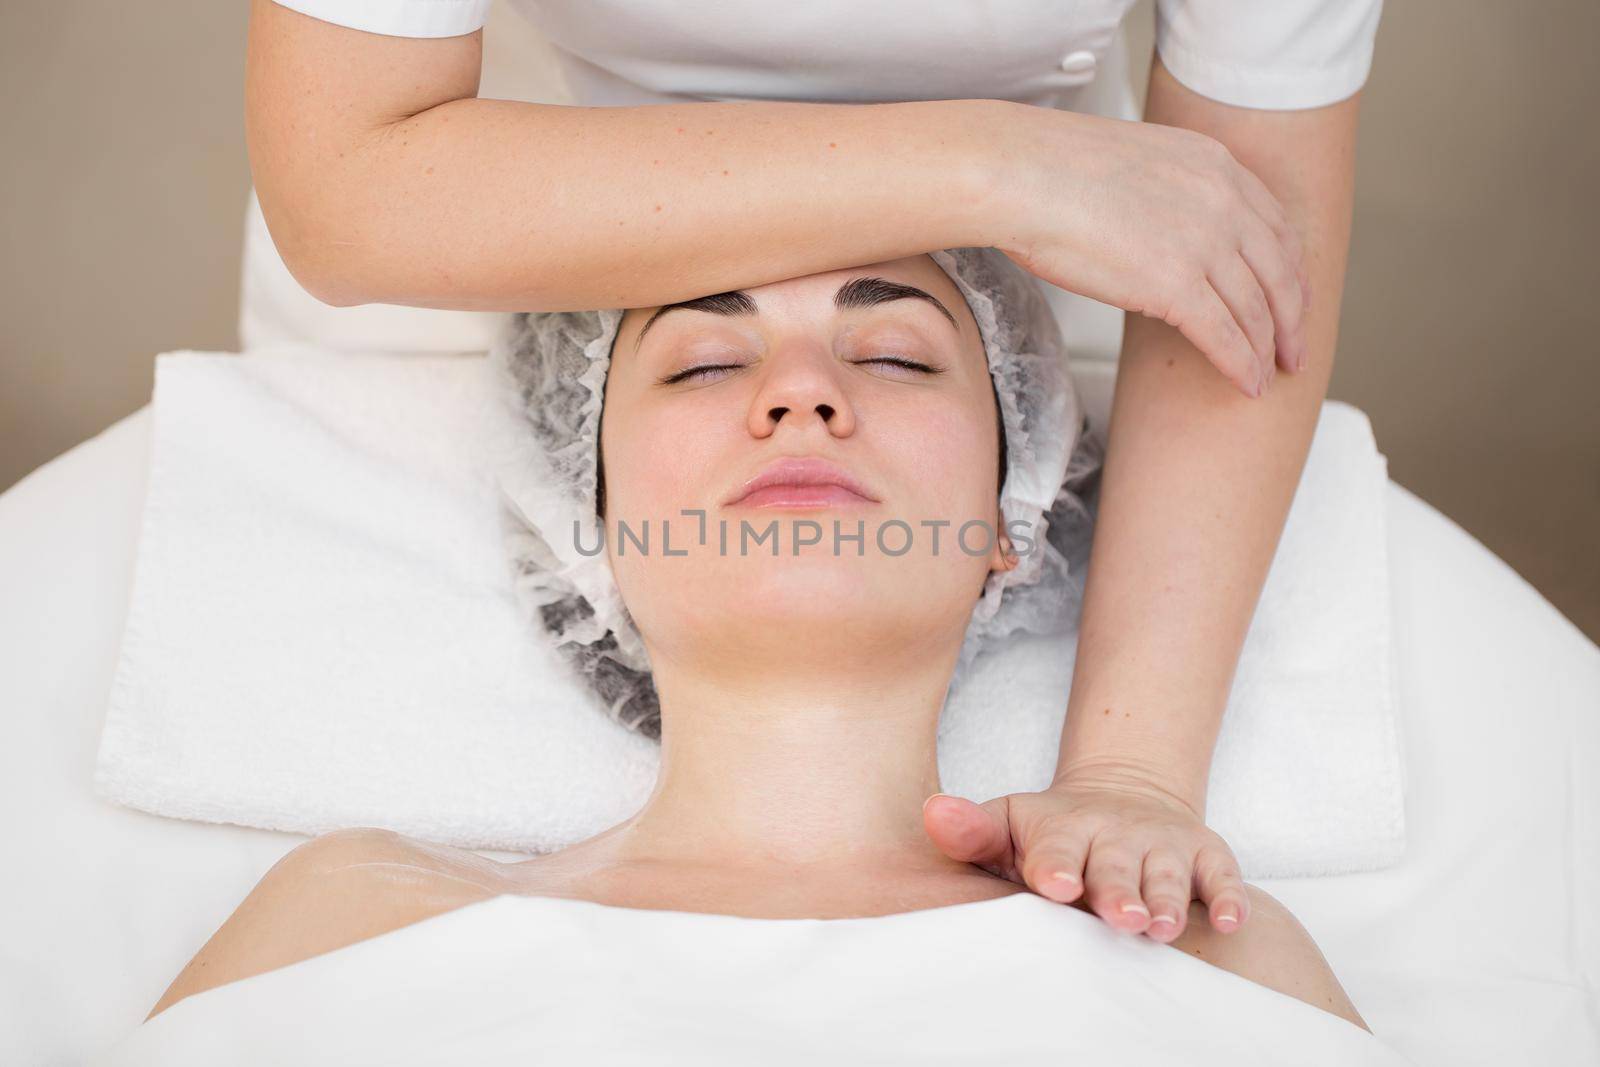 Beautician makes a professional massage of the face of the neck and shoulders for a young girl in the Spa salon. The view from the top. Facial beauty treatment